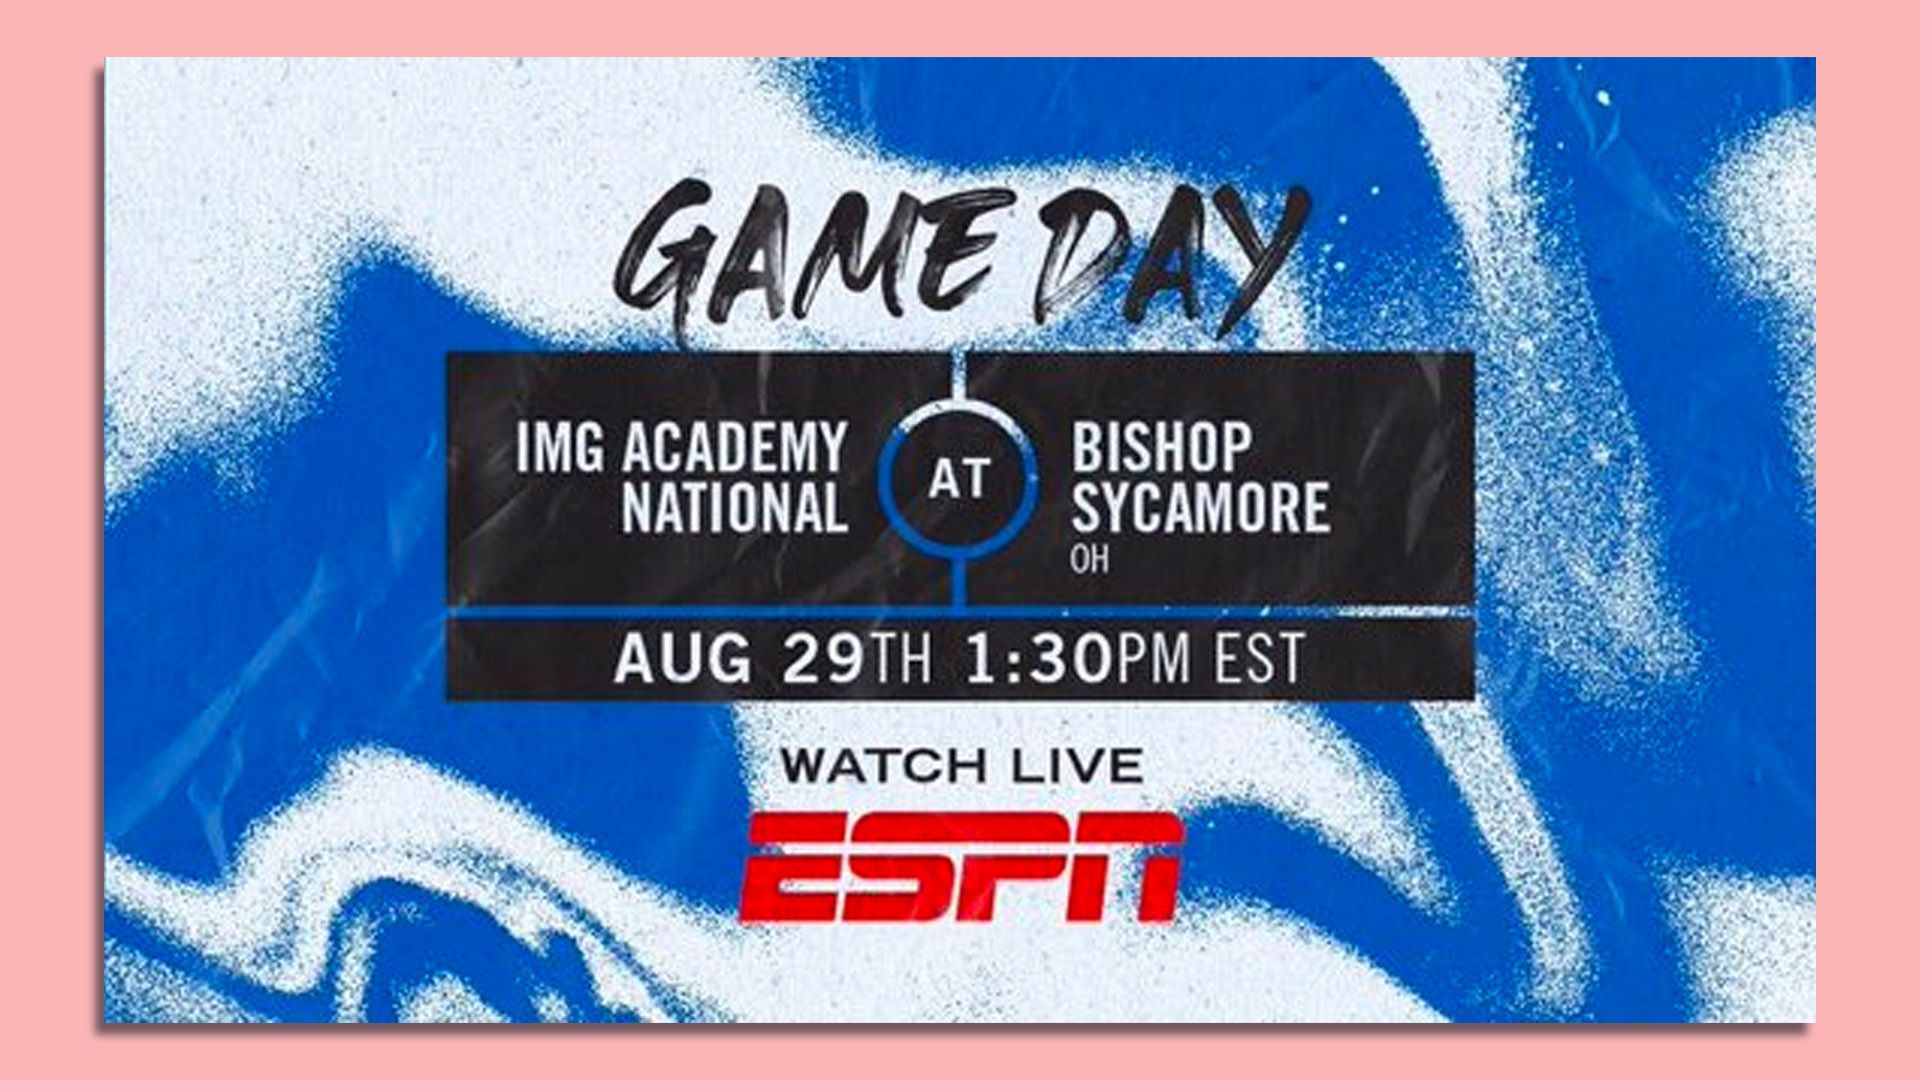 Promo graphic for Bishop Sycamore game airing on ESPN